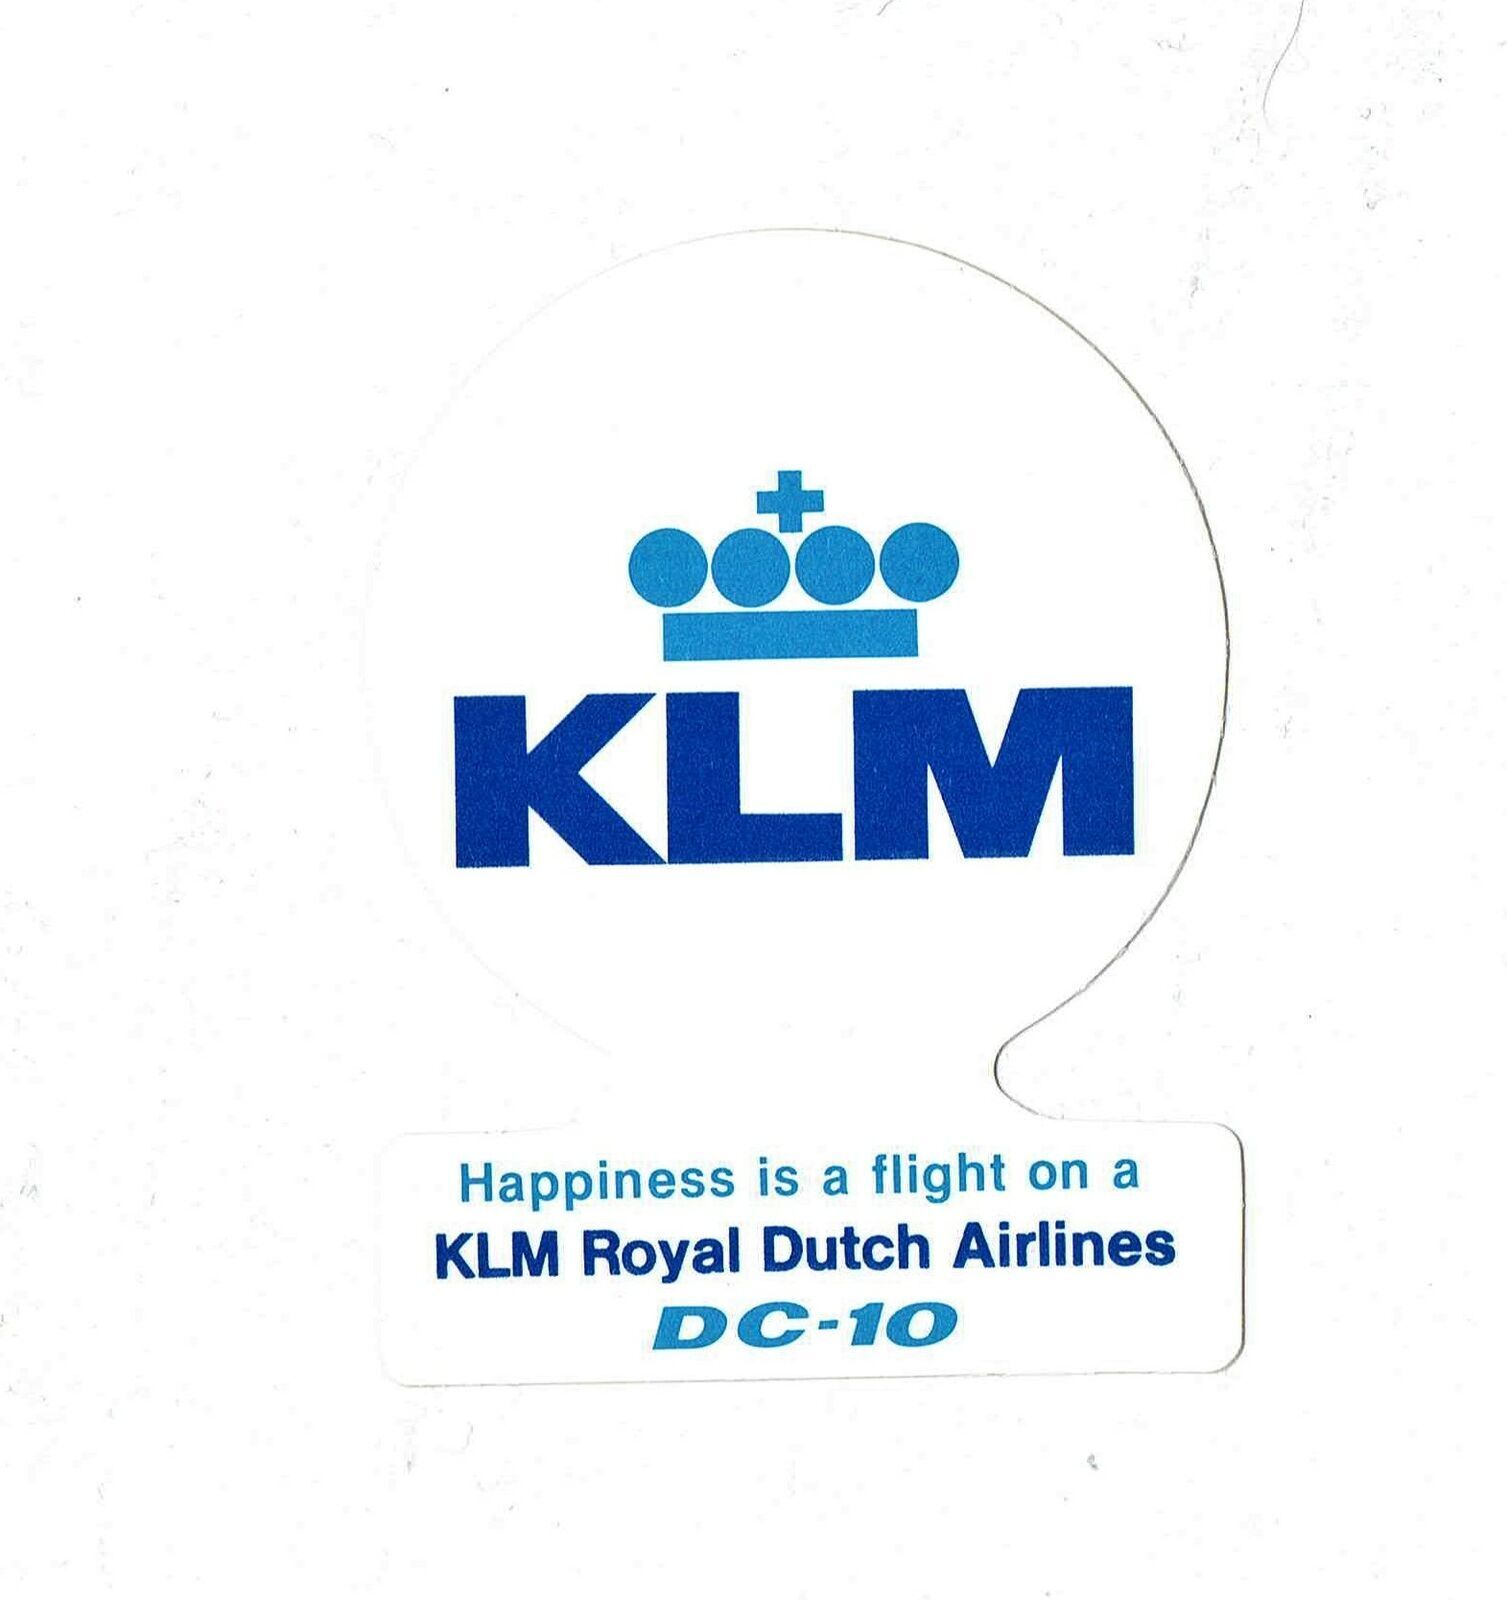 KLM ROYAL DUTCH AIRLINES STICKER  DOUGLAS DC 10 HAPPINESS IS A FLIGHT ON A KLM